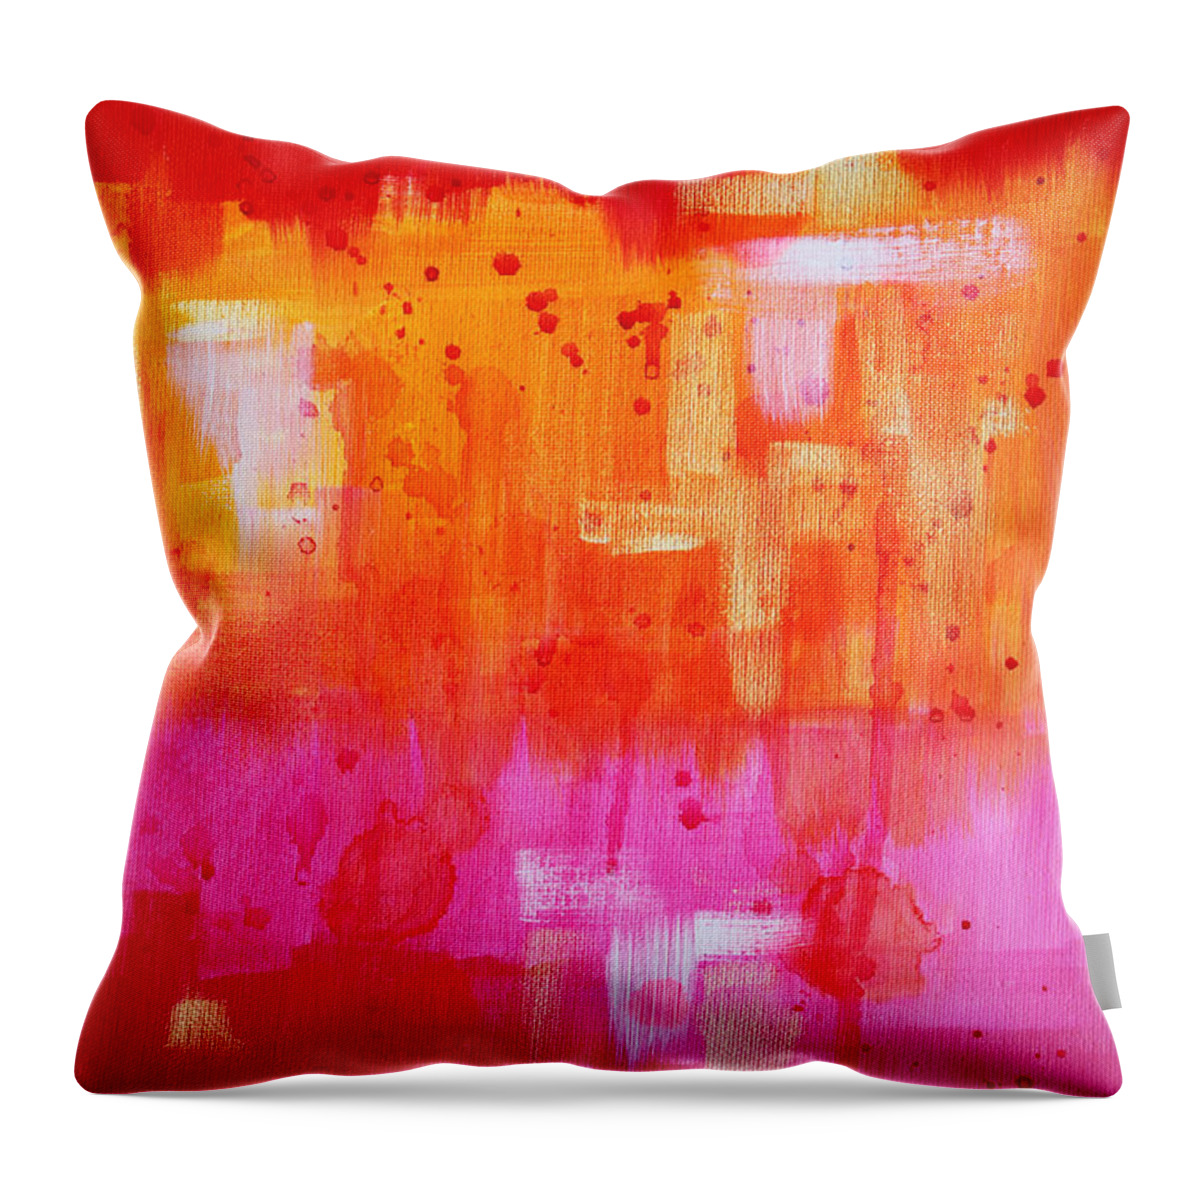 Red Throw Pillow featuring the painting Heat by Nancy Merkle